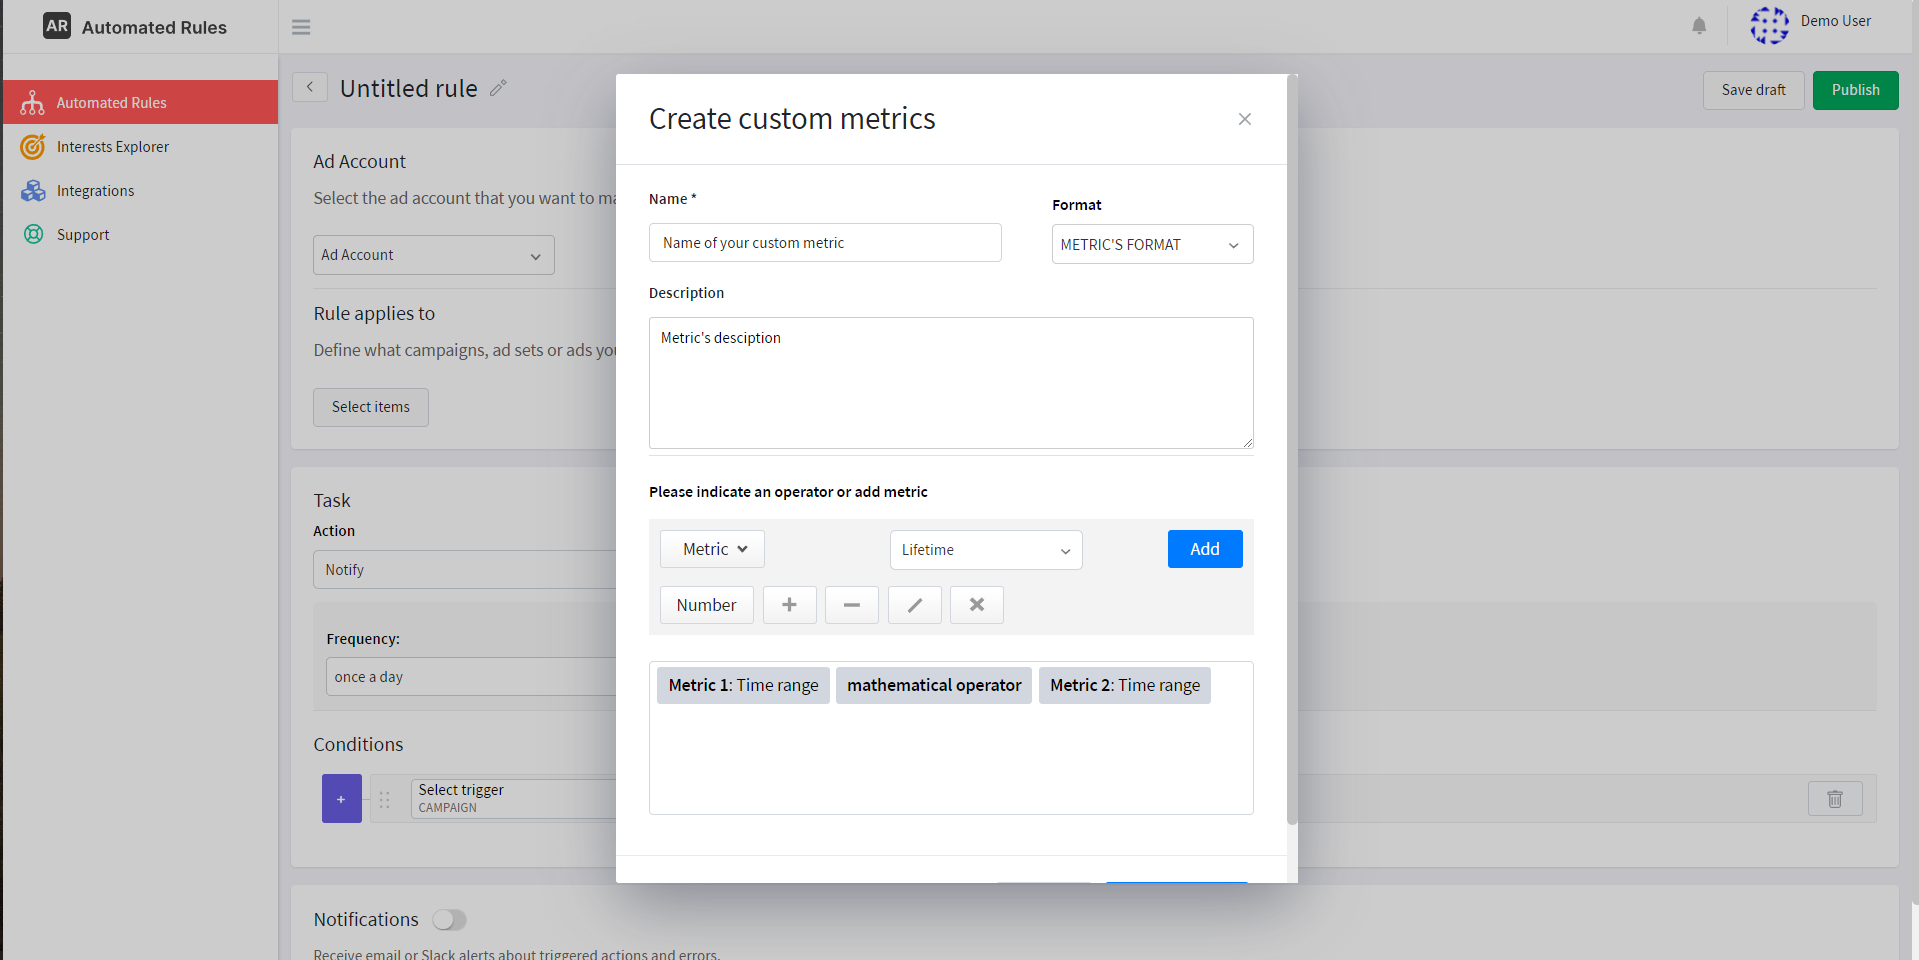 Creating custom metrics for managing Facebook ads with AutomatedRules